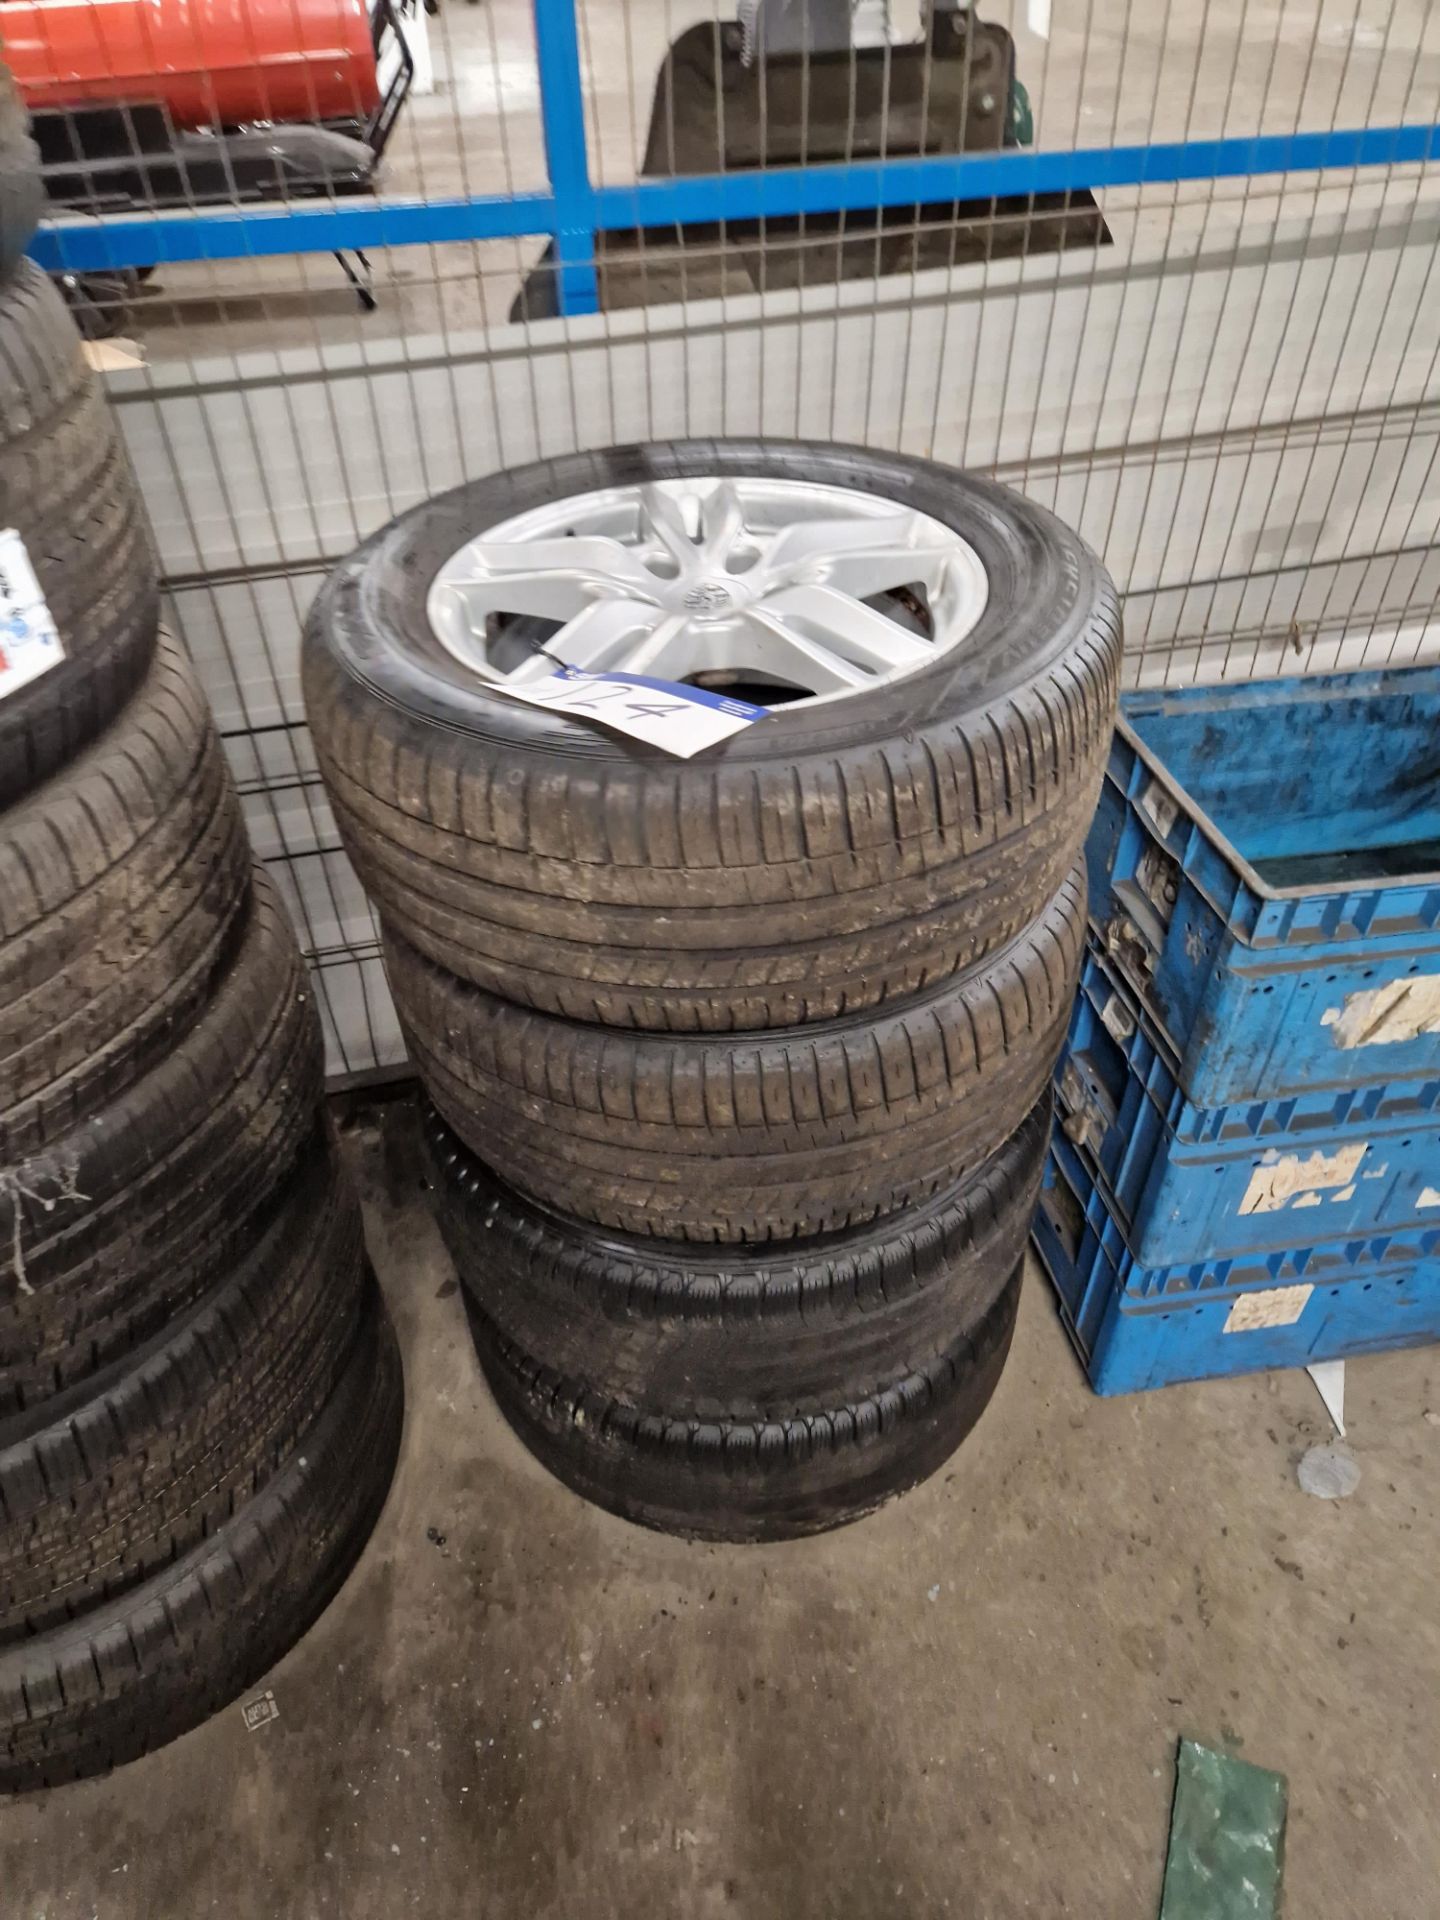 Four Porsche 5 Spoke 18" Alloy Wheels with Part Worn Tyres Please read the following important